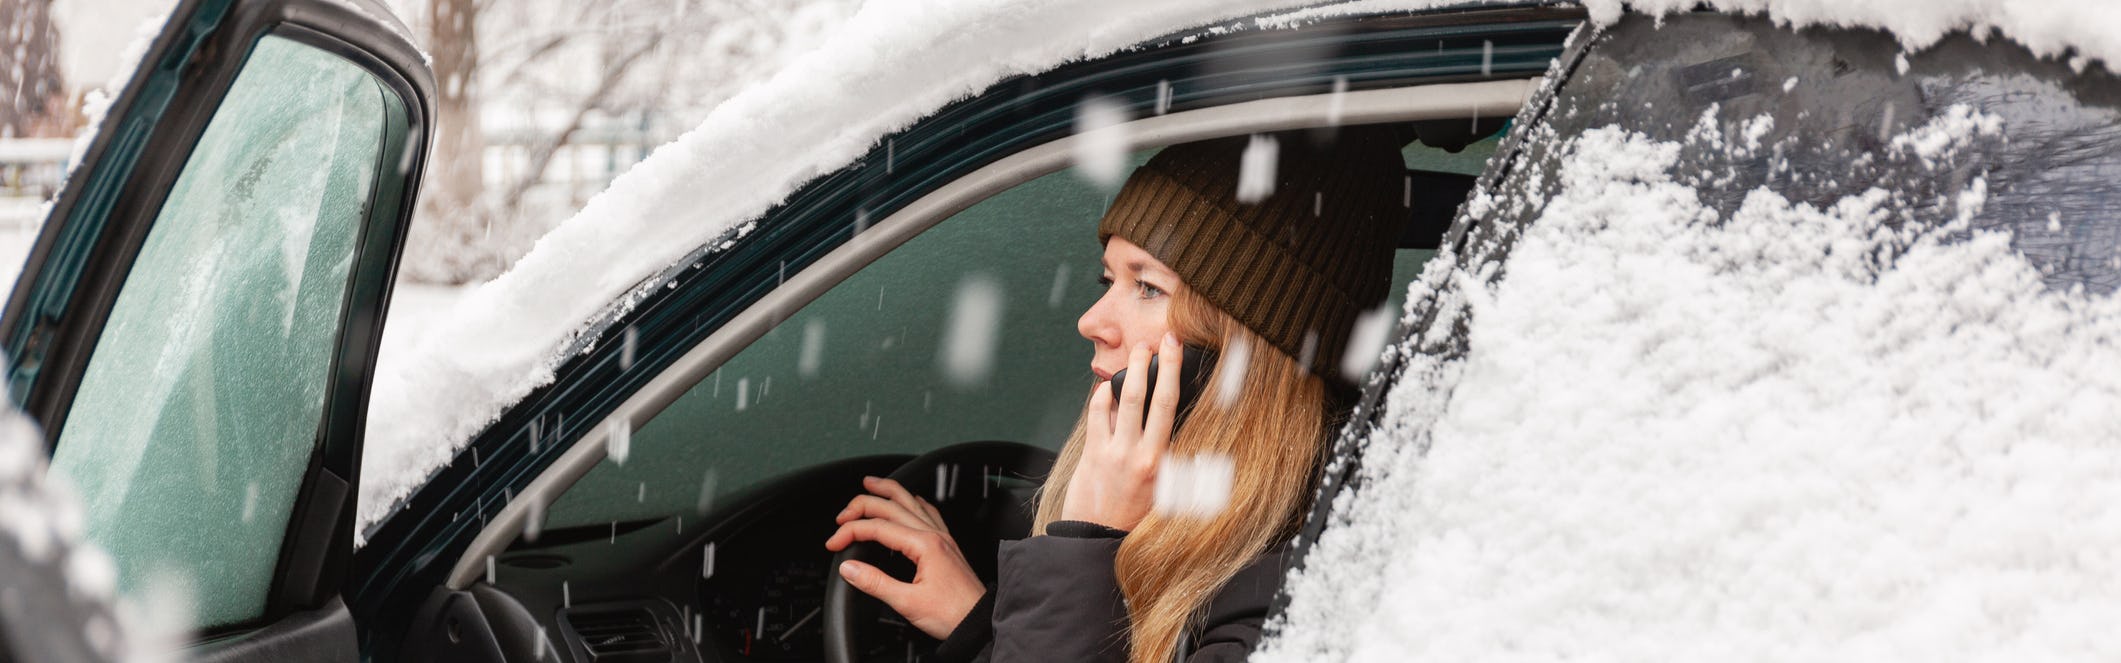 Woman calling for help in a snow covered car